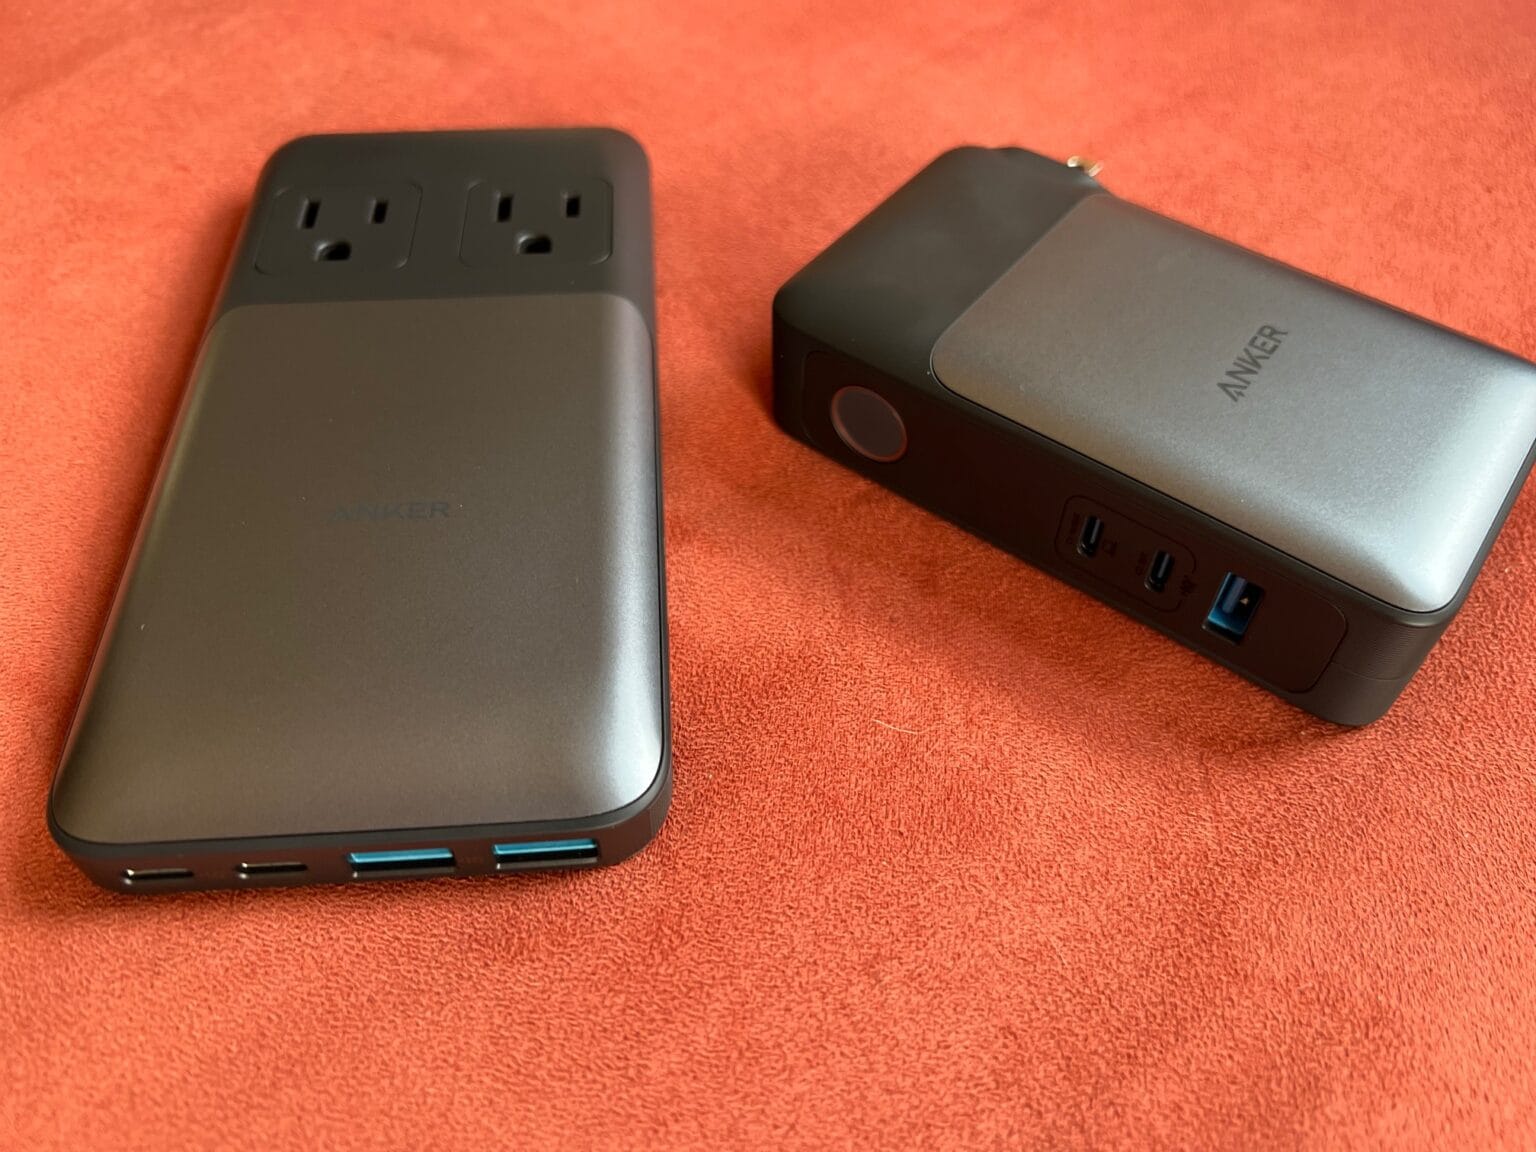 The Anker 727 Power Station, left, and Anker 733 Power Bank have your special needs covered.